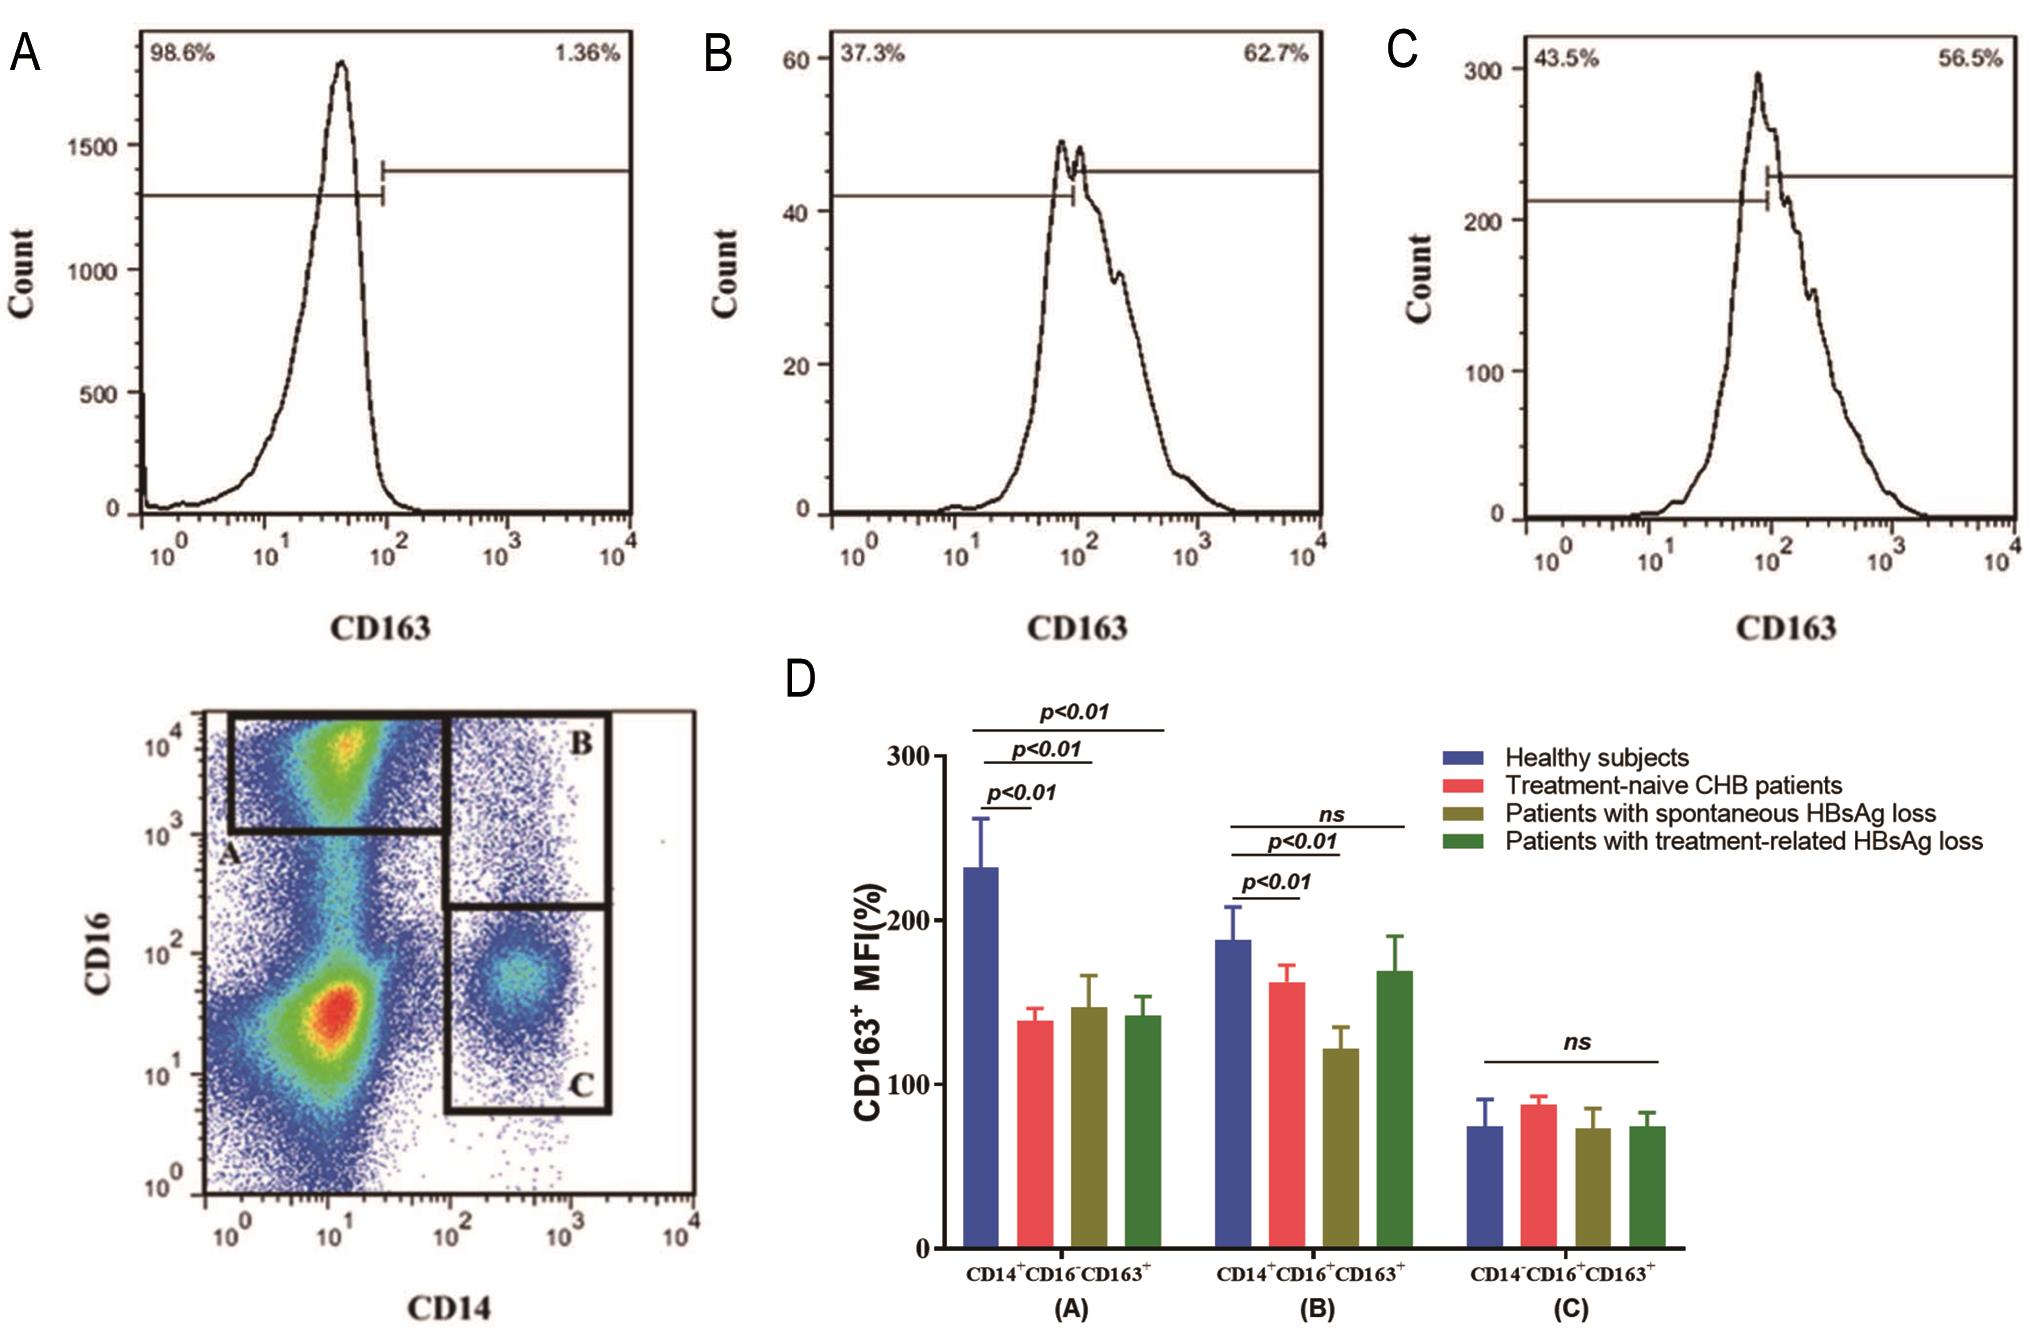 Mean fluorescence intensity (MFI) of CD163 expression on monocytes subsets. Gating of monocyte/macrophage subsets by CD14 and CD16 expression.